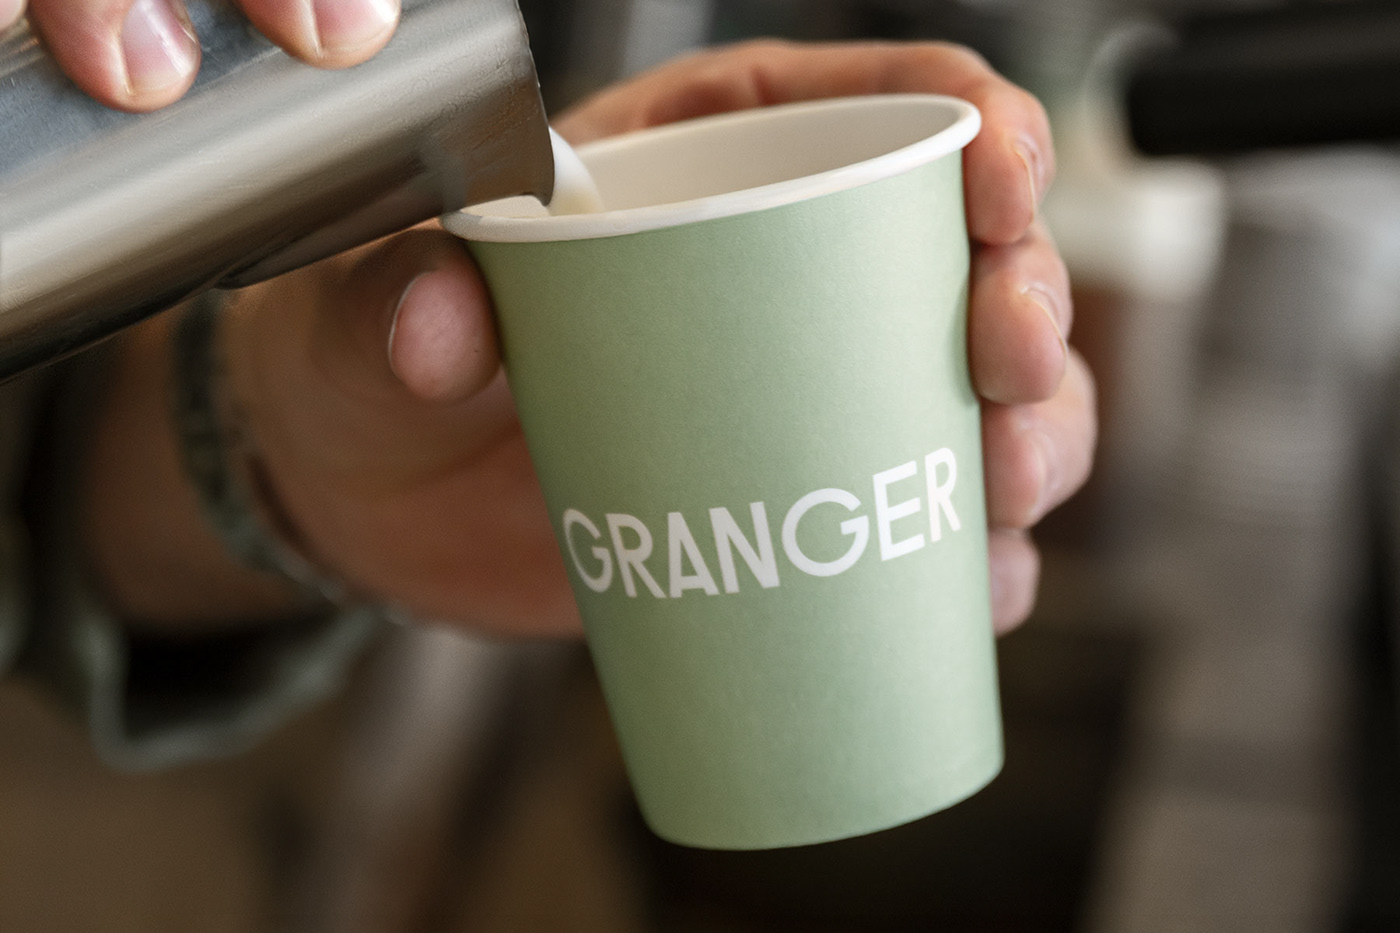 granger cafe business card coffee cup menu Signage green